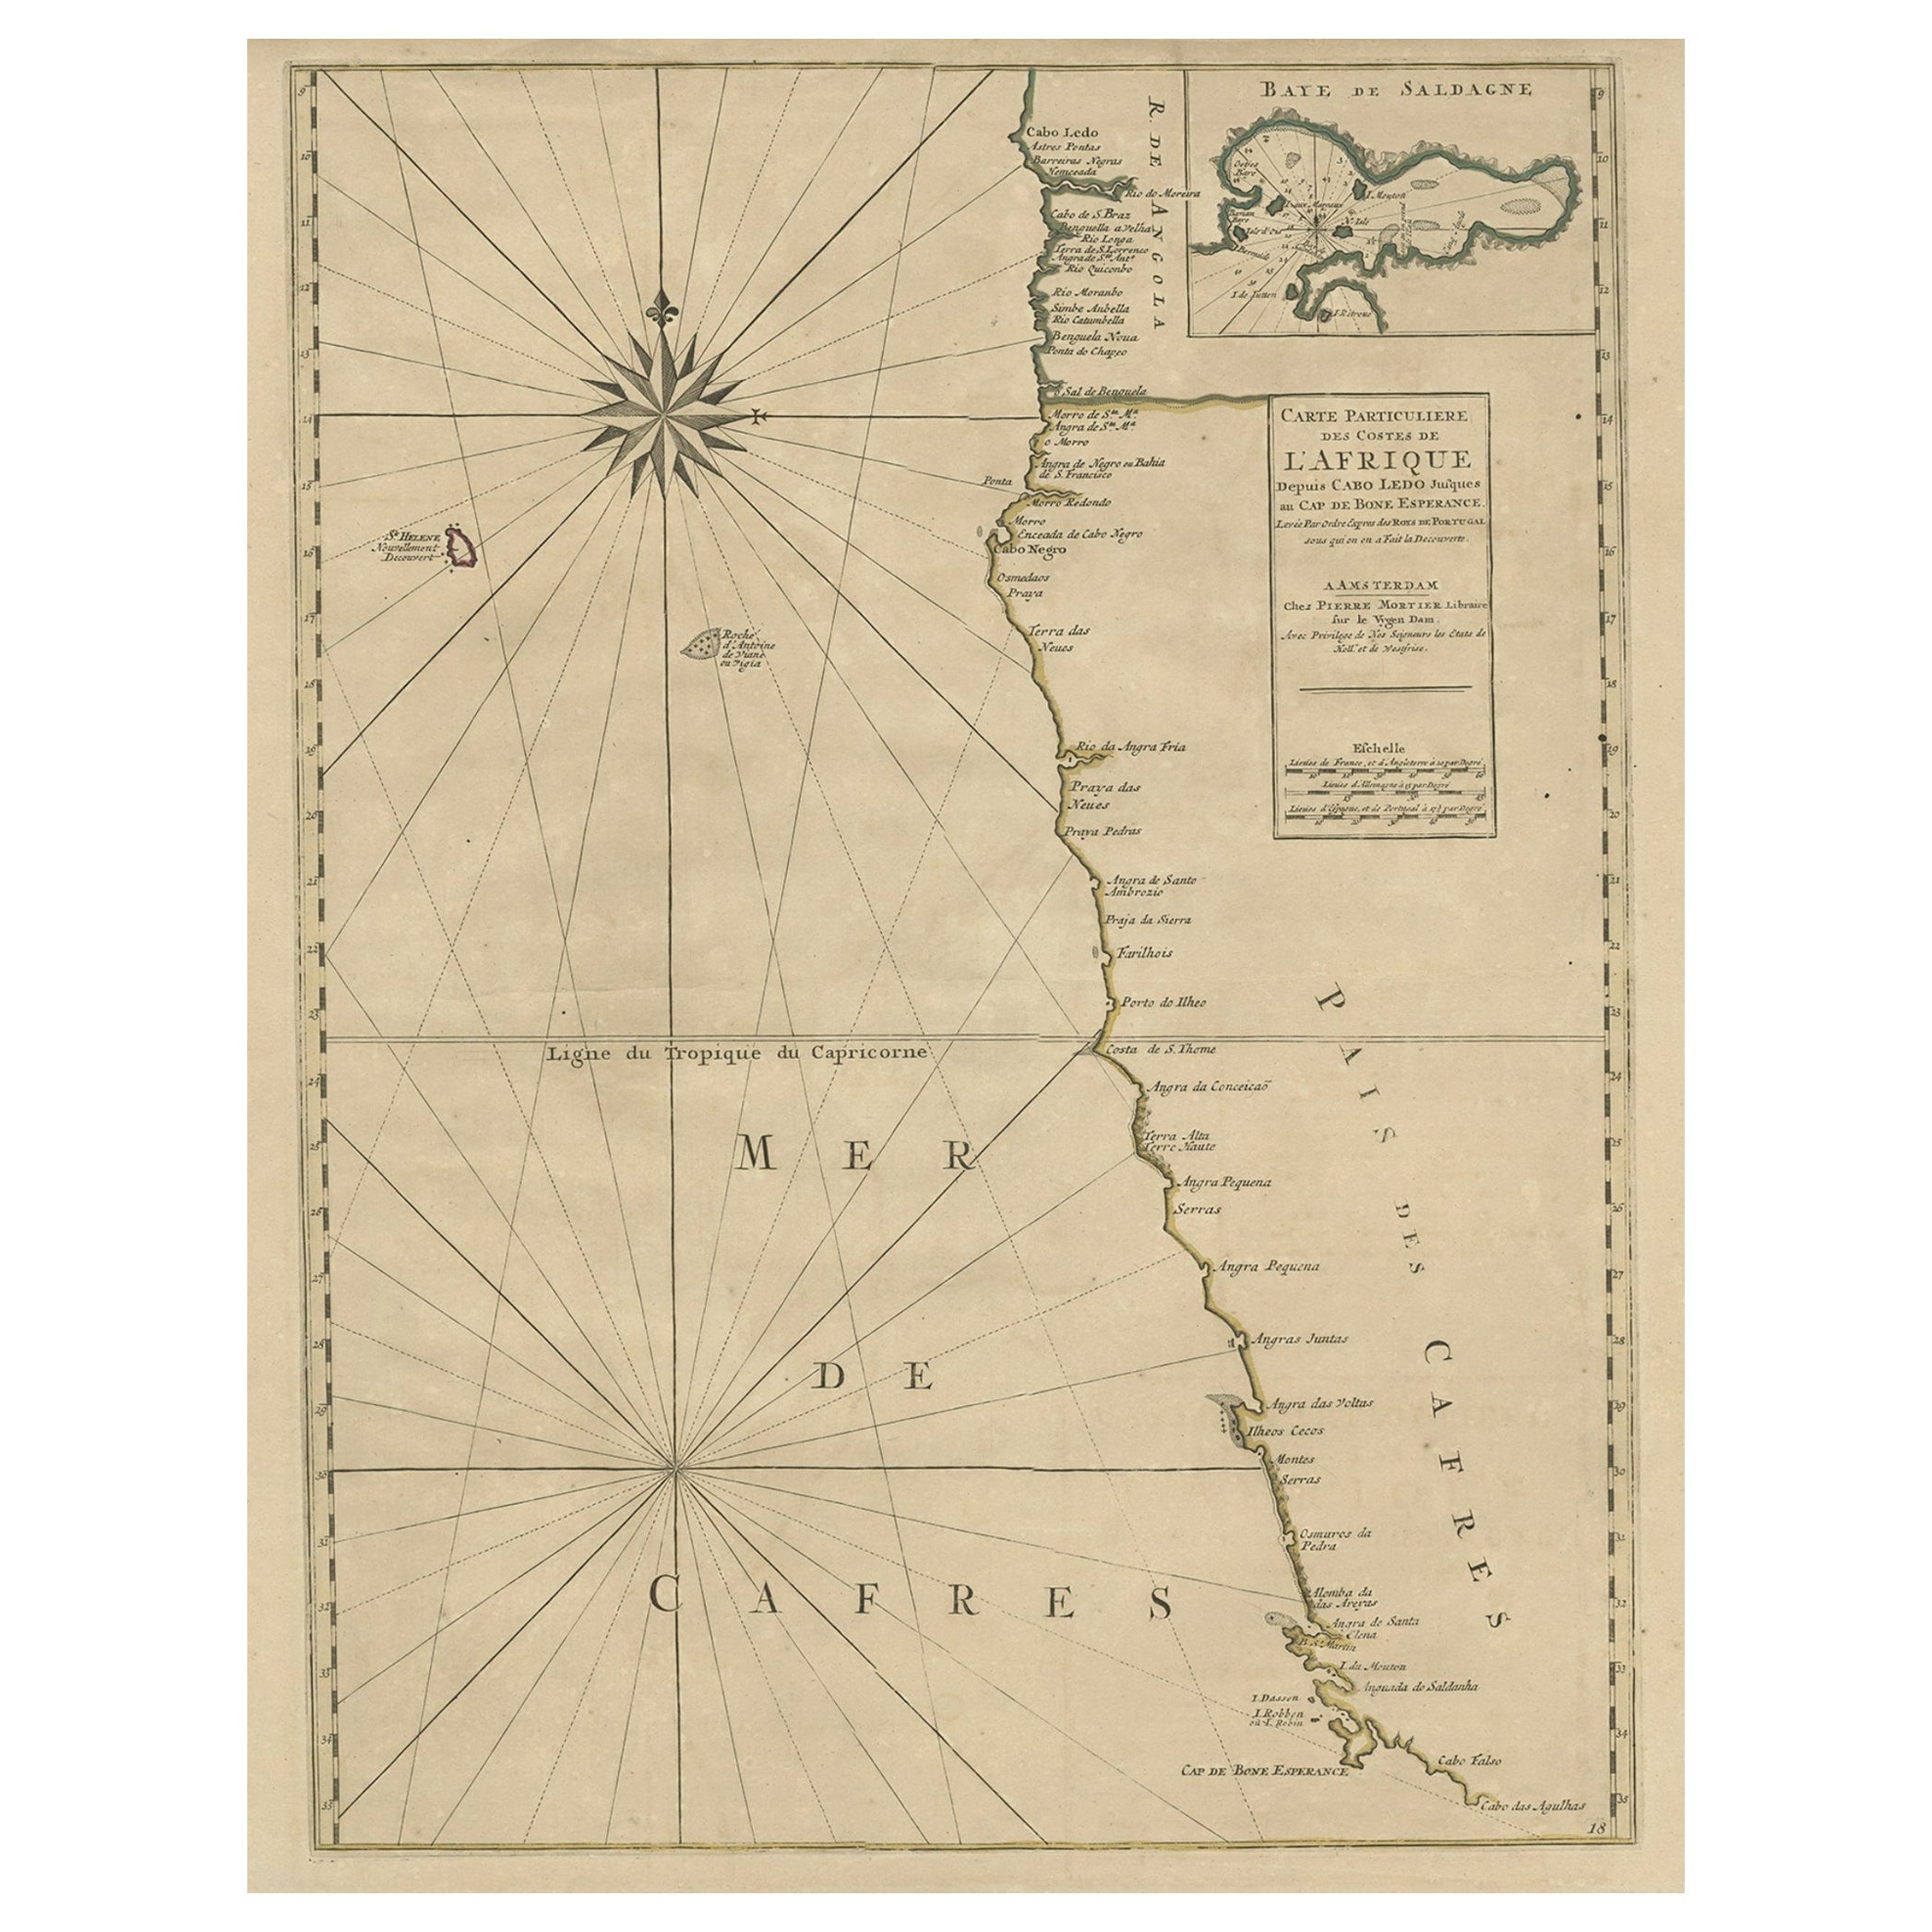 Old Map of the Namibia and South Africa Coasts & Inset of Saldanha Bay, ca.1700